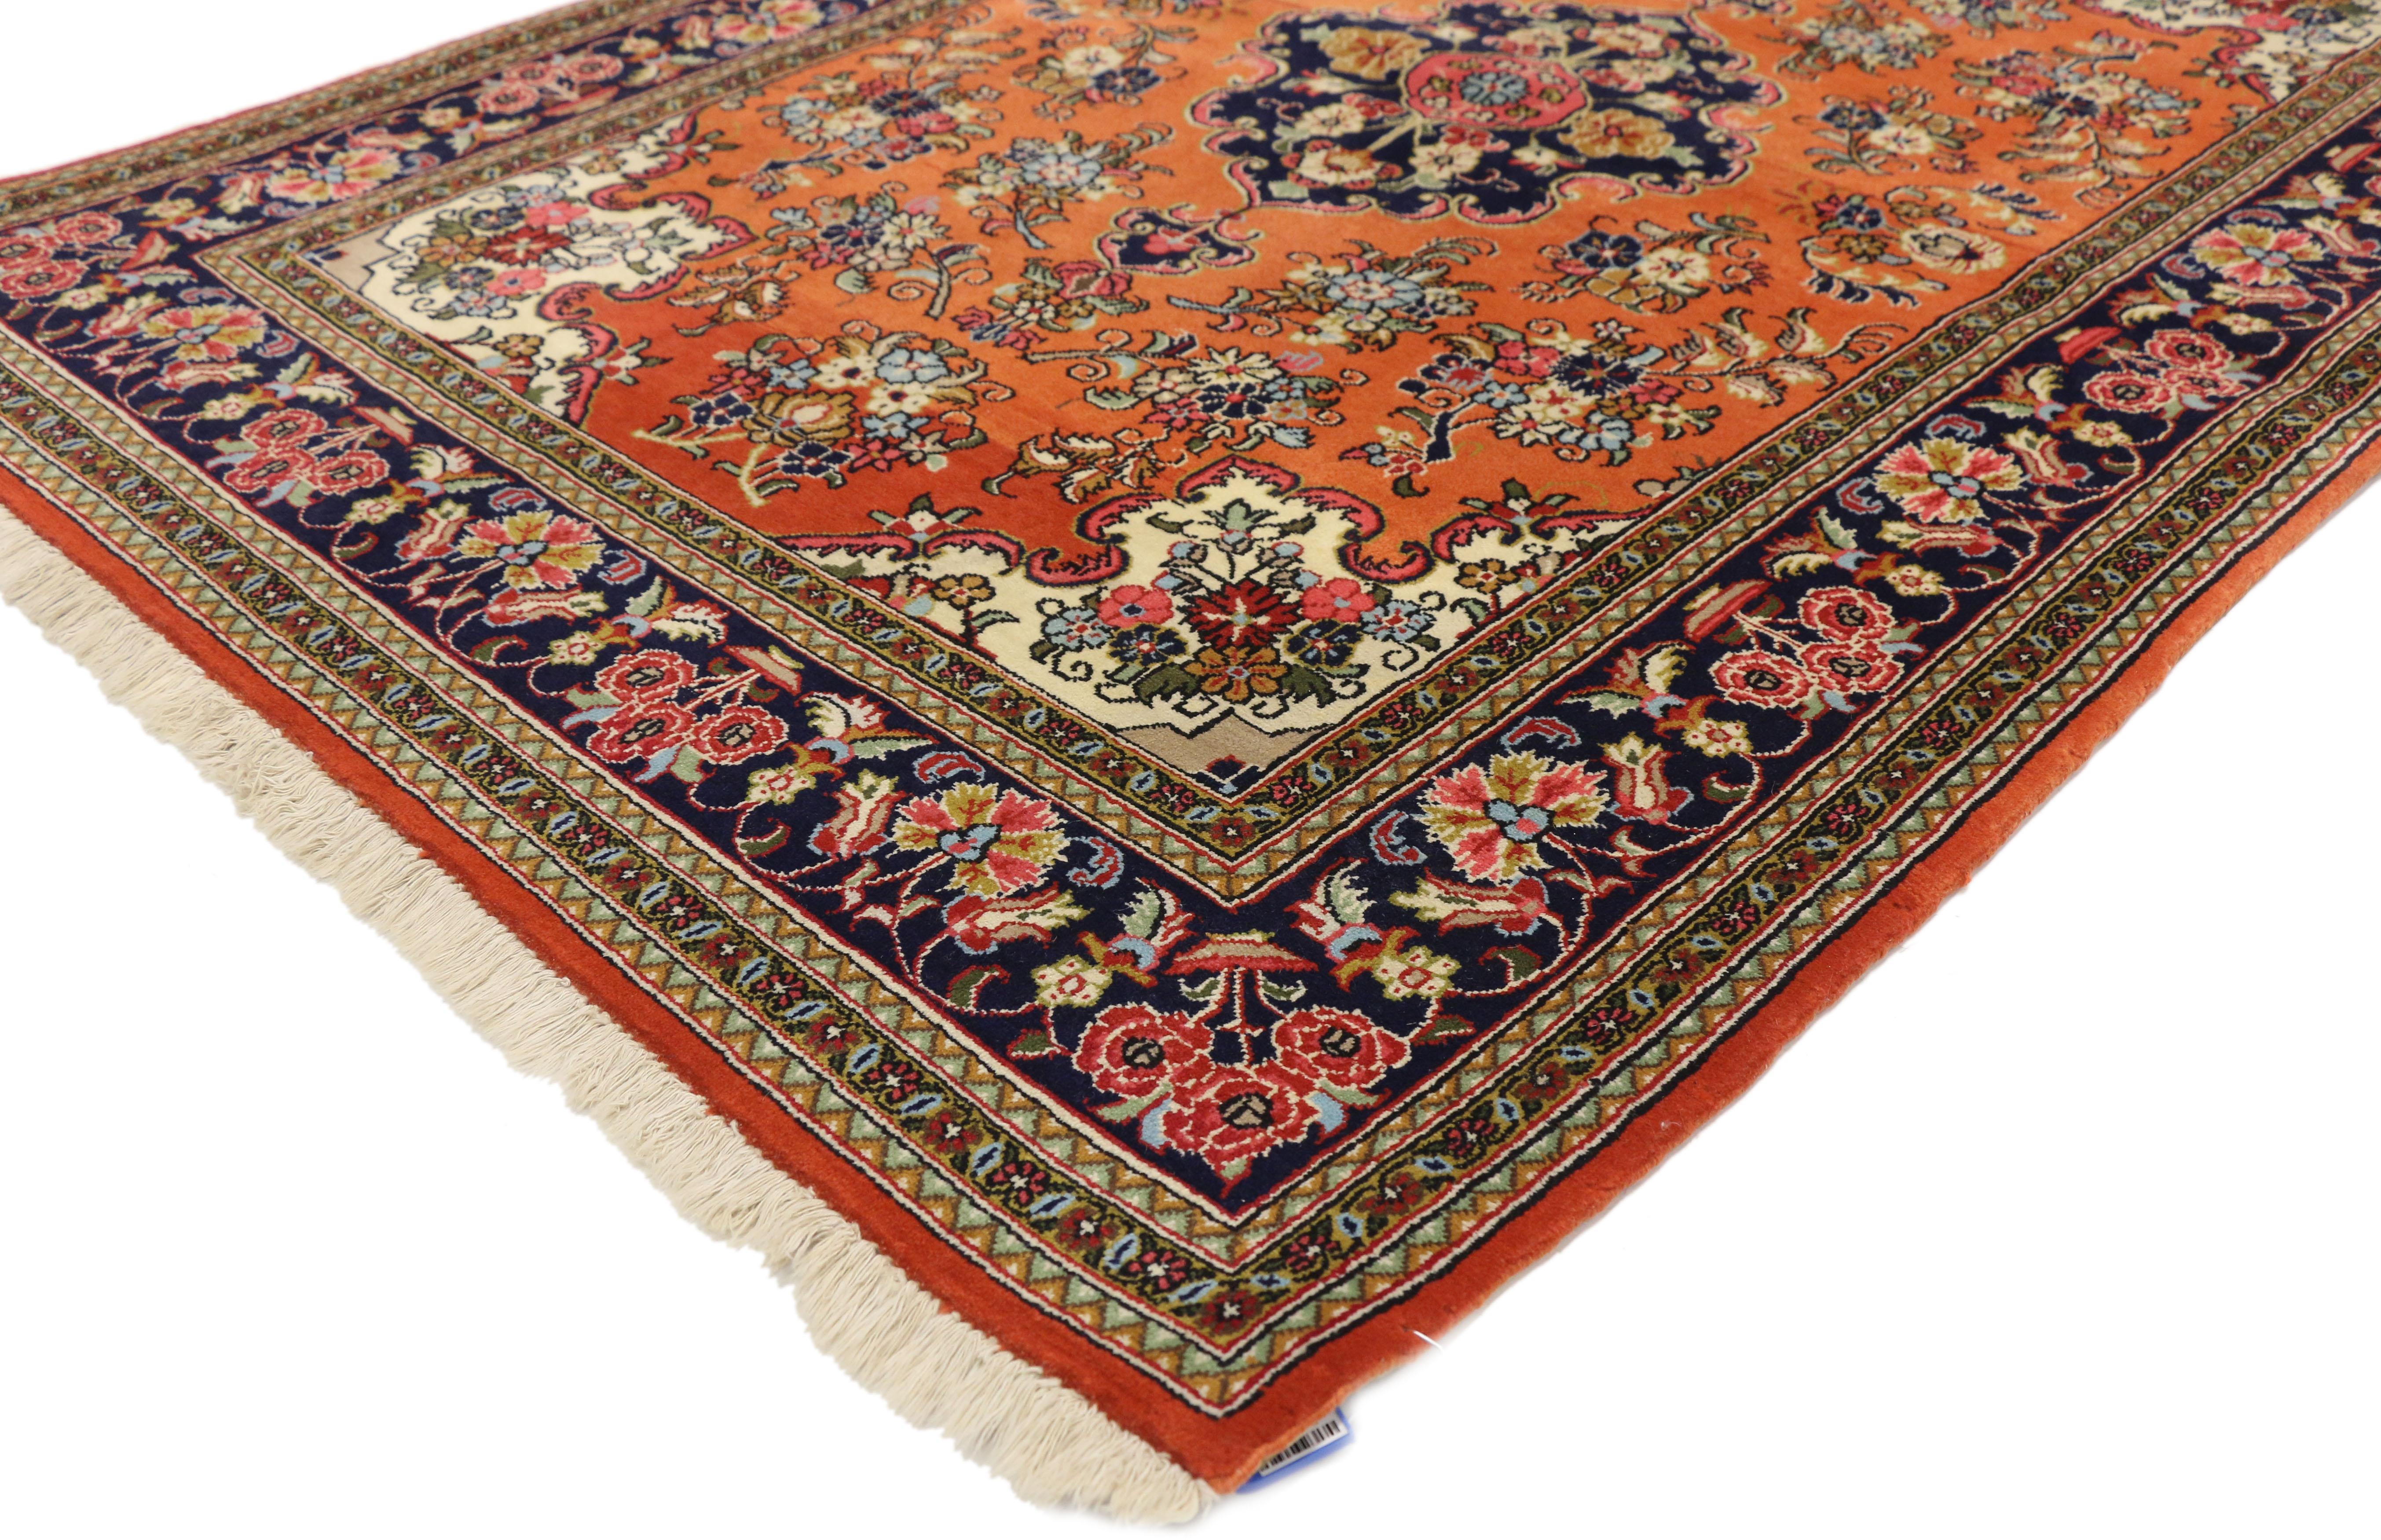 74689, Orange Vintage Persian Qum Floral Silk Rug with French Rococo Style. The Persian Qum silk rug with French Rococo style features a central floral medallion on a field of abrash orange filled with floral bouquets in variegated shades of blue,